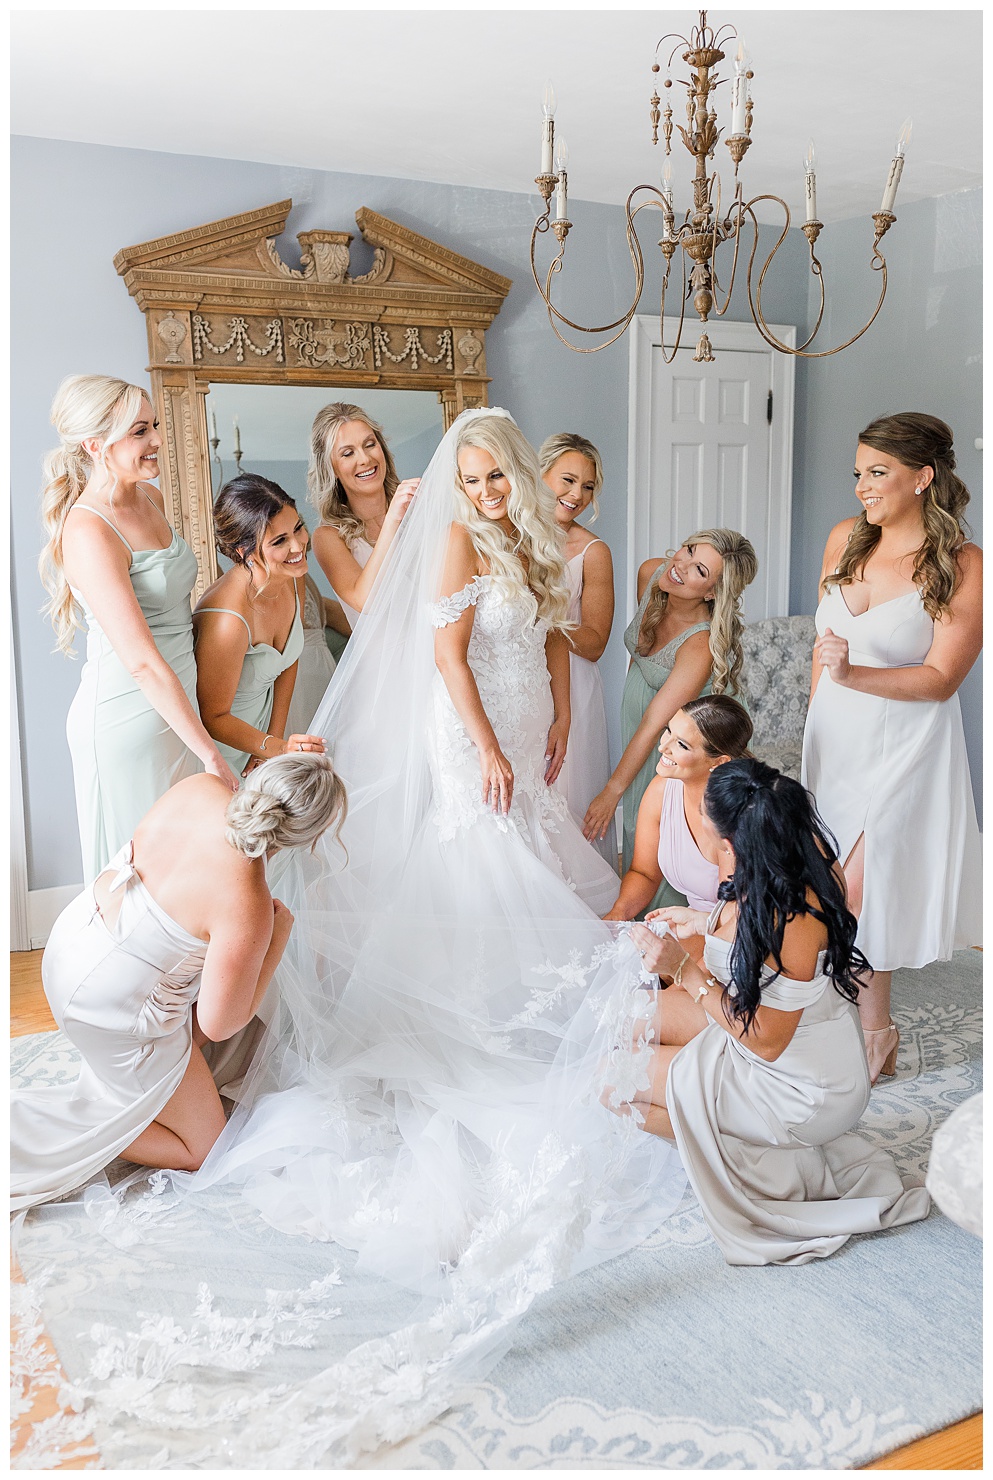 bride and bridesmaids first look at the stone House of st. Charles wedding venue